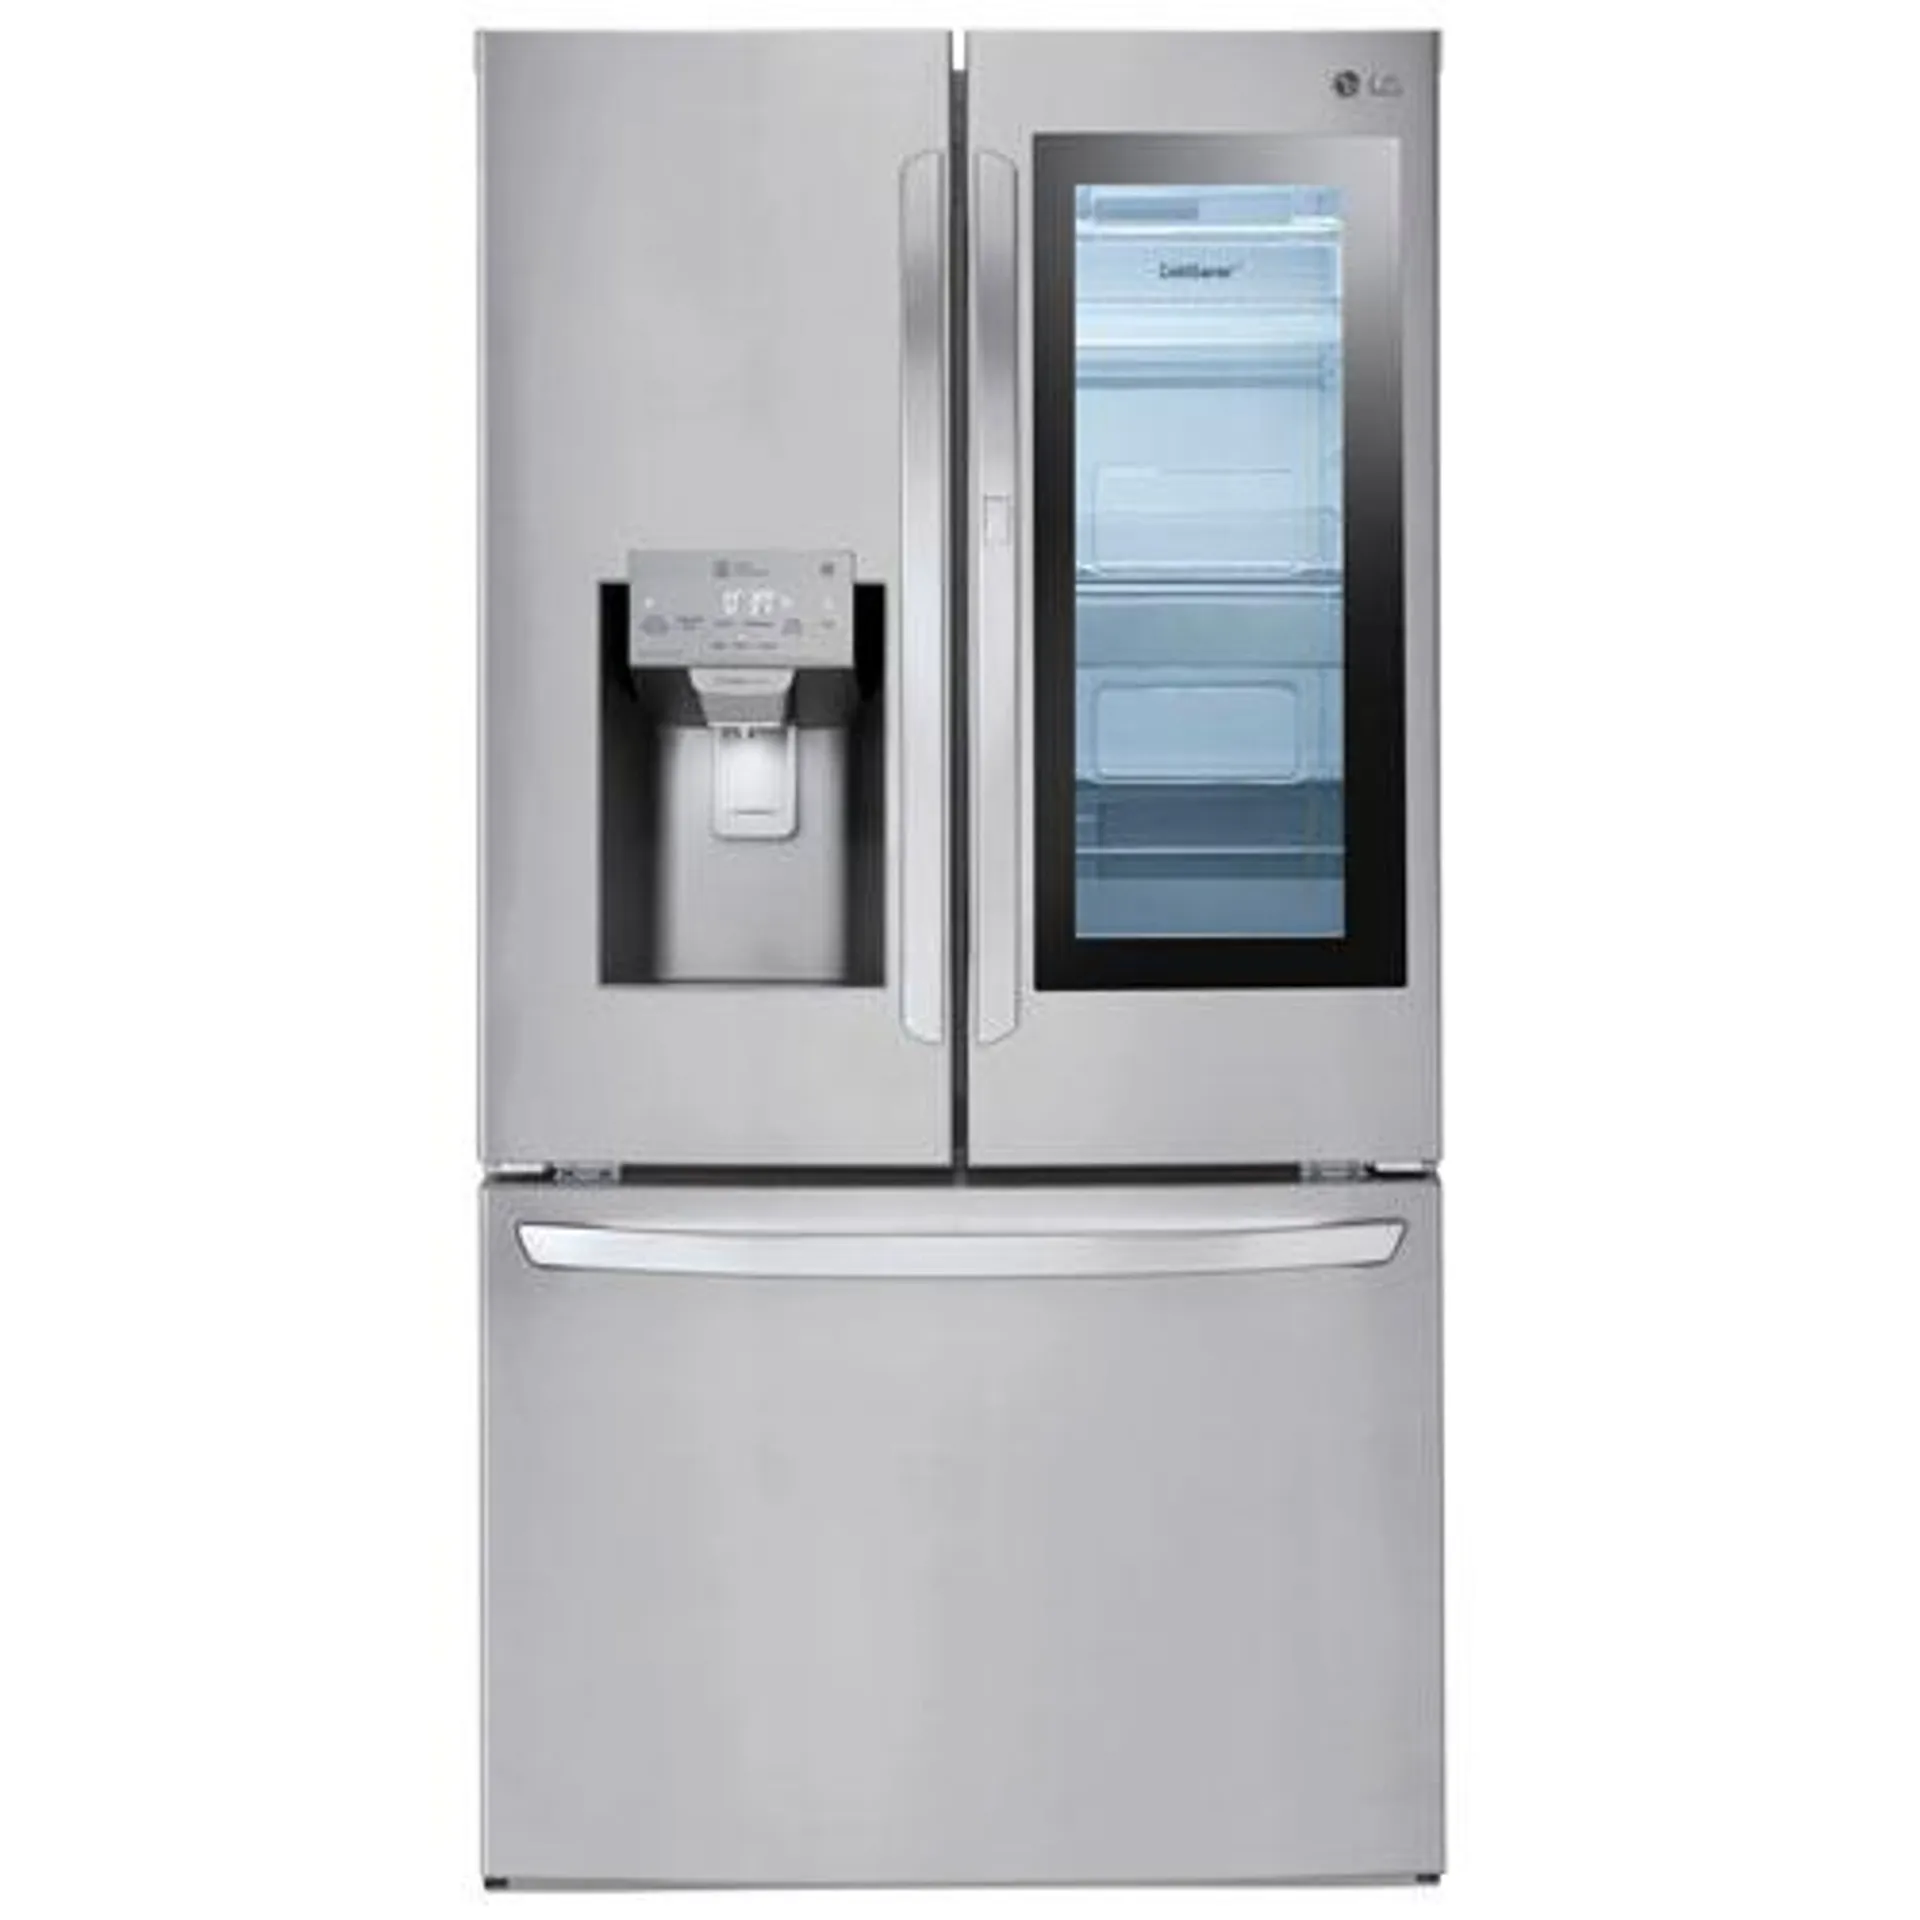 LG Instaview 36" 27.5 Cu.Ft. French Door Refrigerator with Water & Ice Dispenser (LFXS28596S) -Stainless